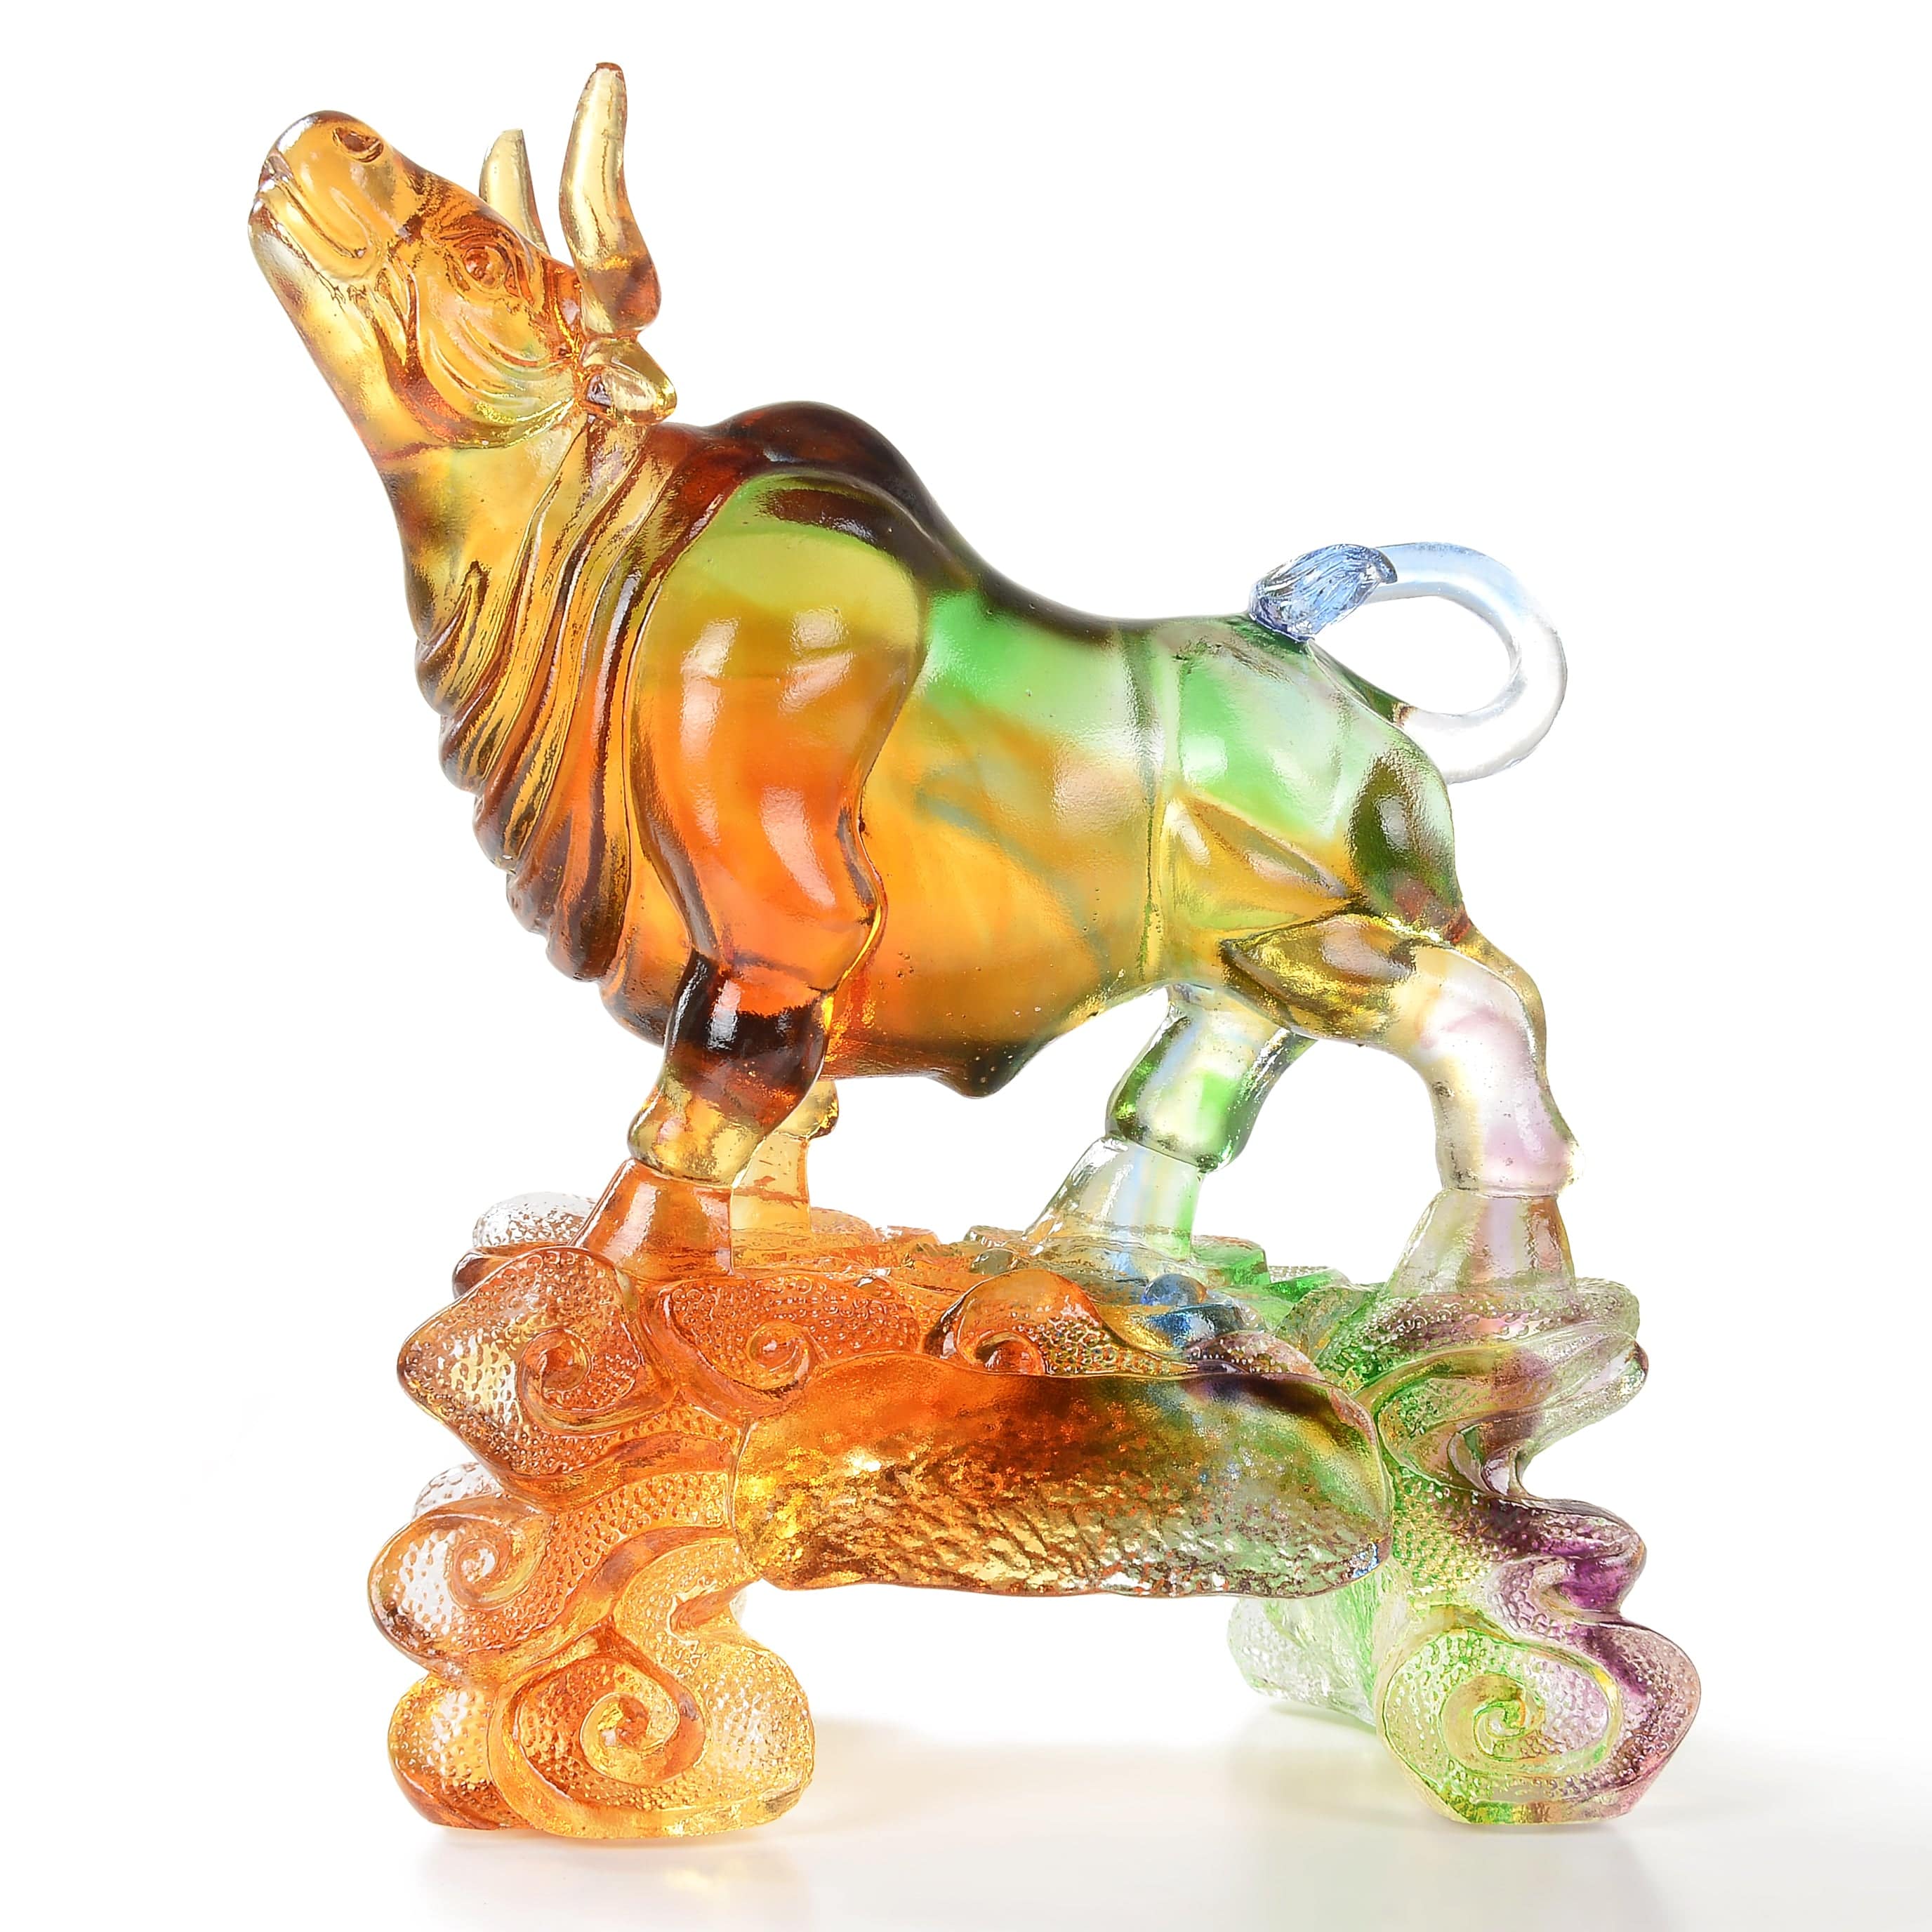 Kalifano Crystal Carving Calm Cow Crystal Carving - A Symbol of Nurturance and Serenity CR360-COW